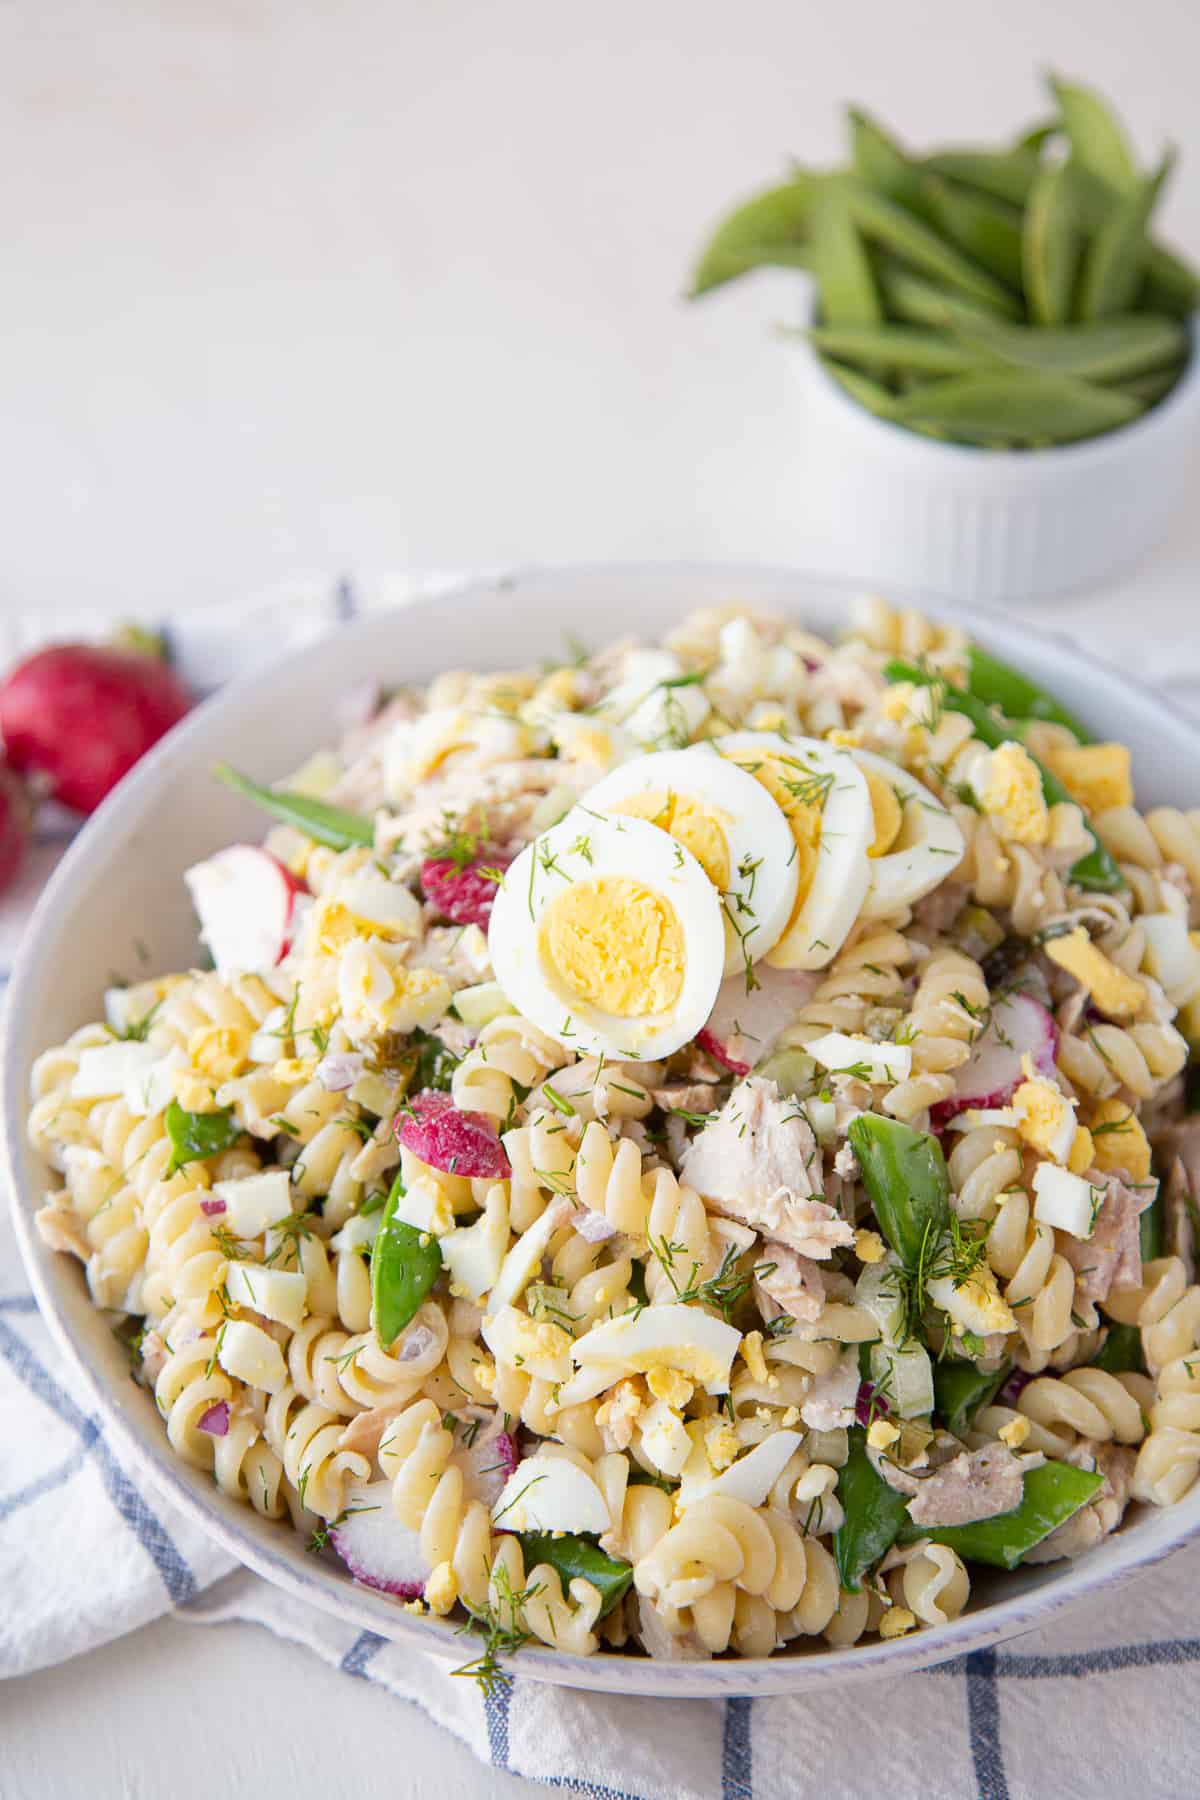 tuna pasta salad in a white bowl with snap peas and radishes on the side.